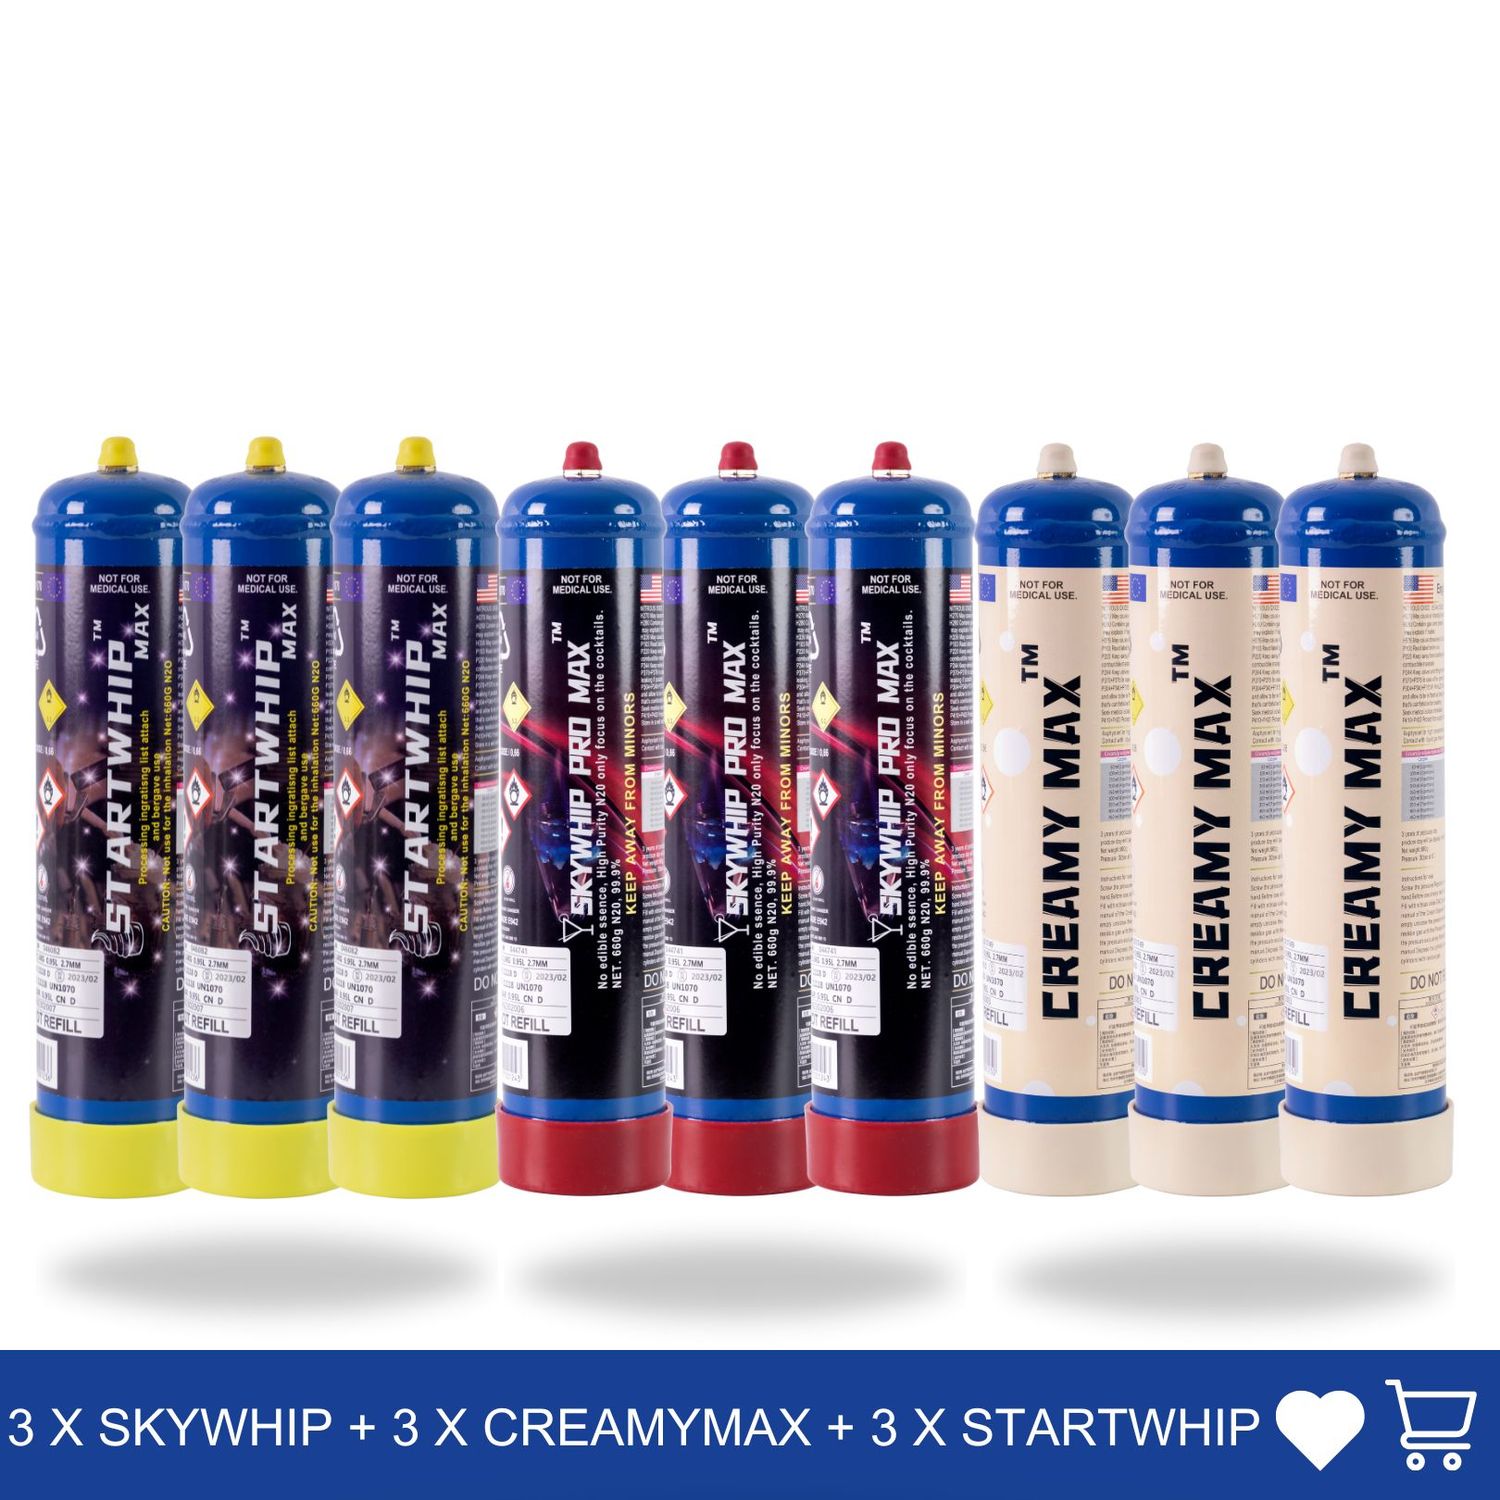 Cream Chargers: 9 x 660g Cylinder Cream Chargers Value Combo